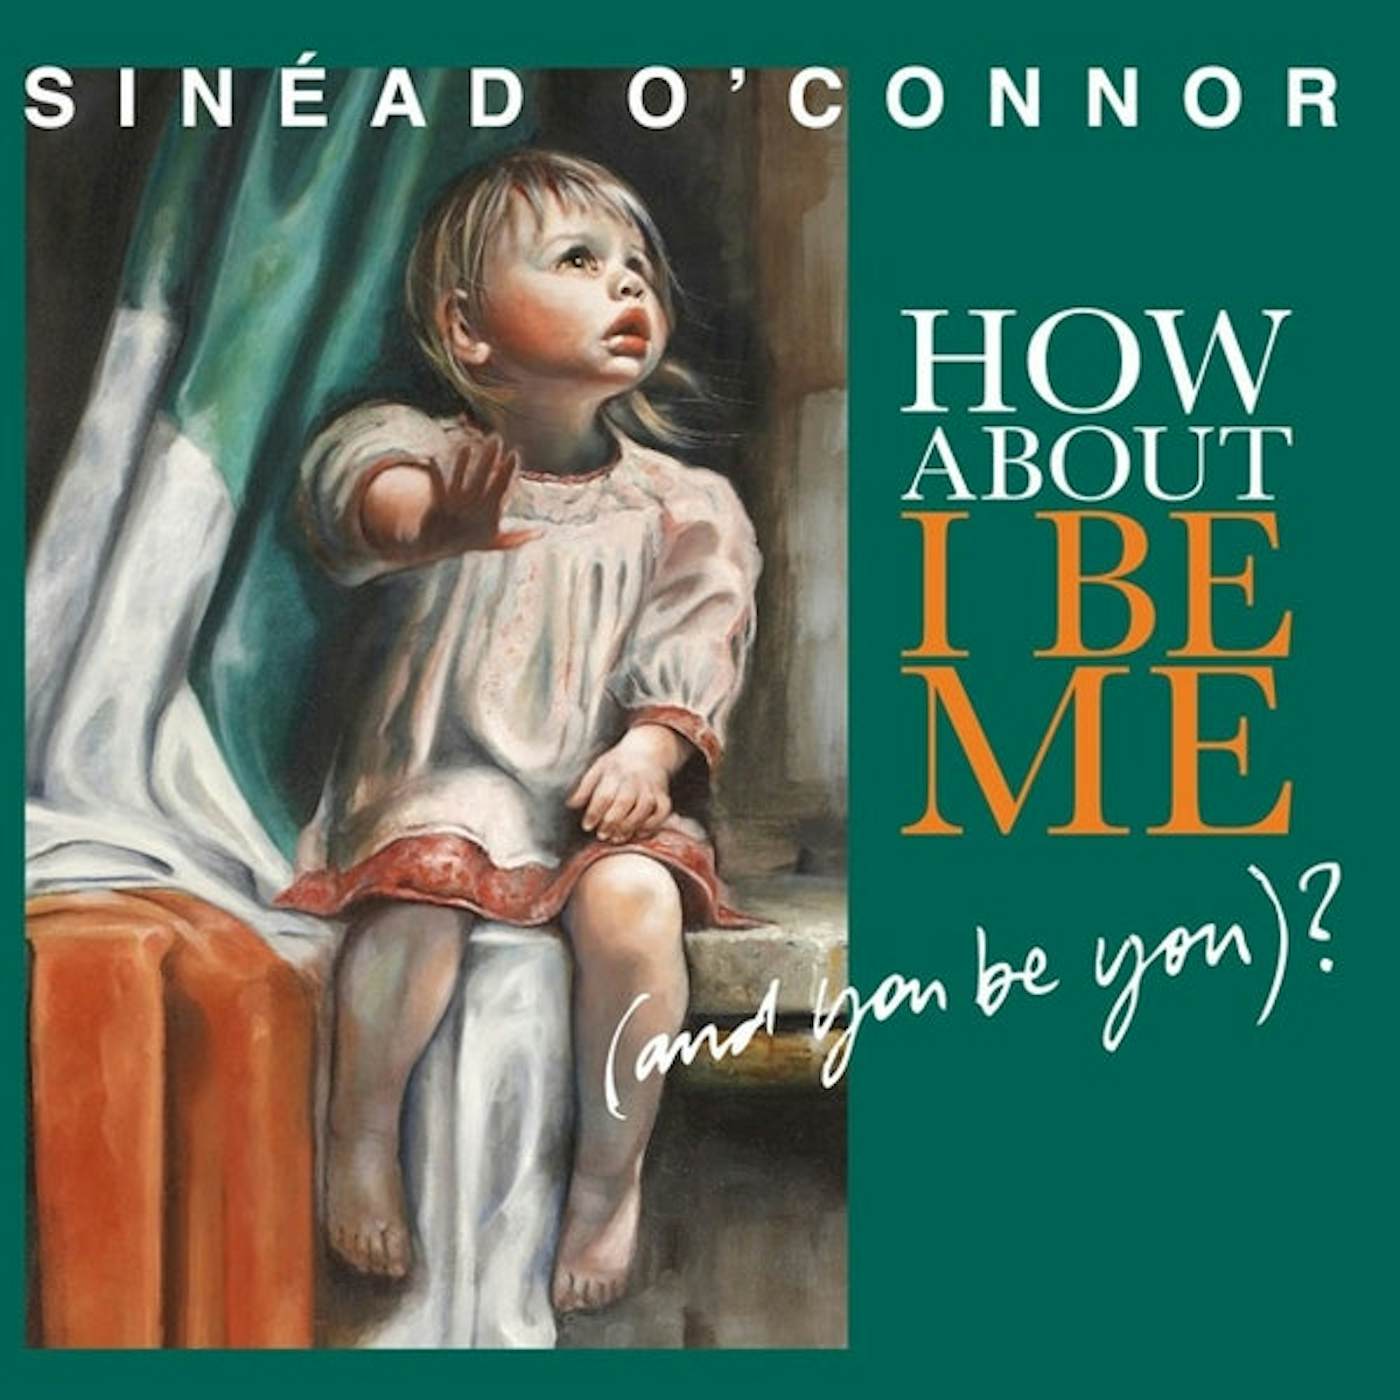 Sinéad O'Connor HOW ABOUT I BE ME (& YOU BE YOU) Vinyl Record